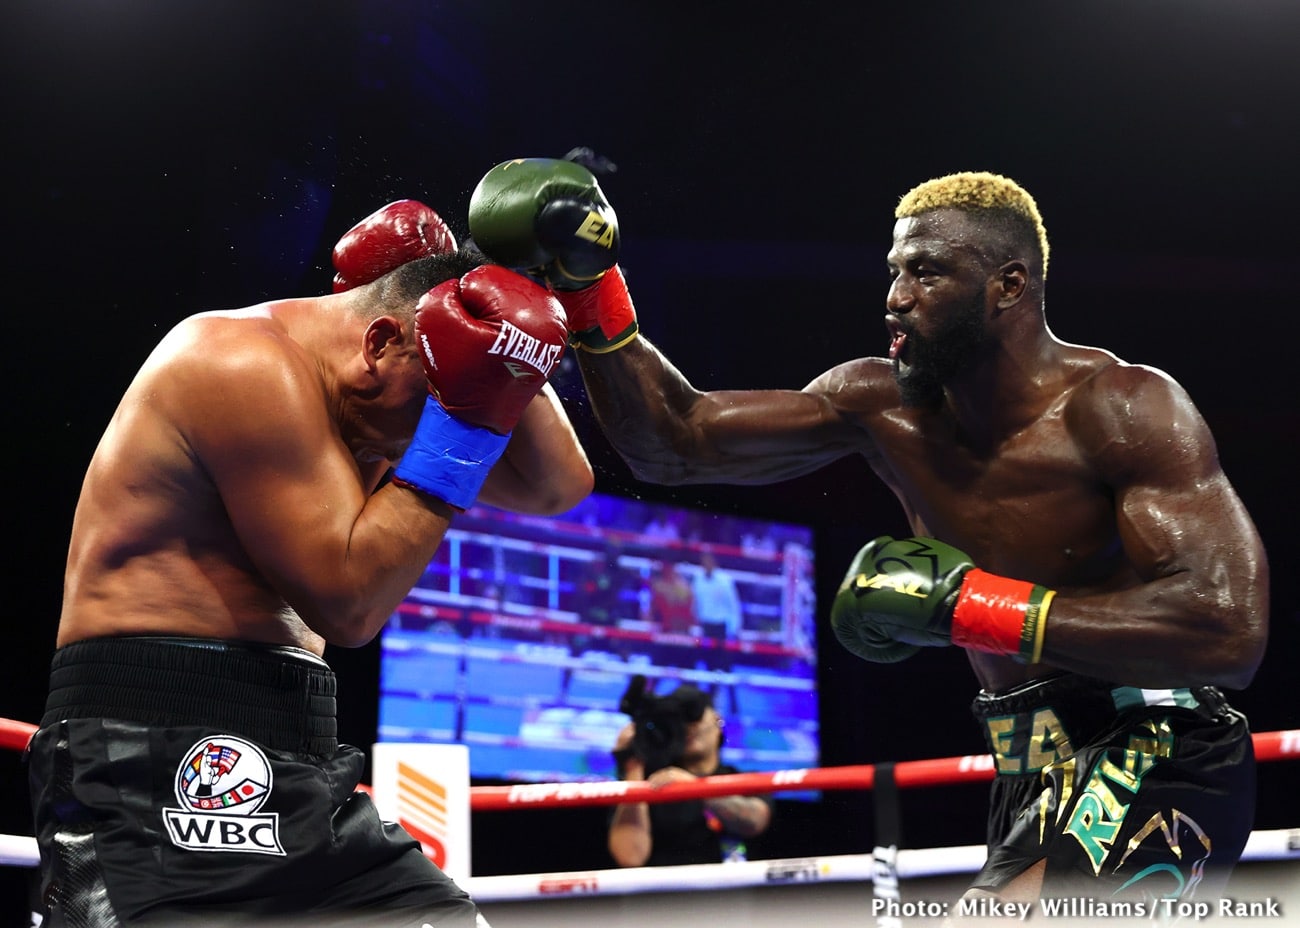 Image: Boxing results: Jared ‘Big Baby’ Anderson Stops Andrii Rudenko!